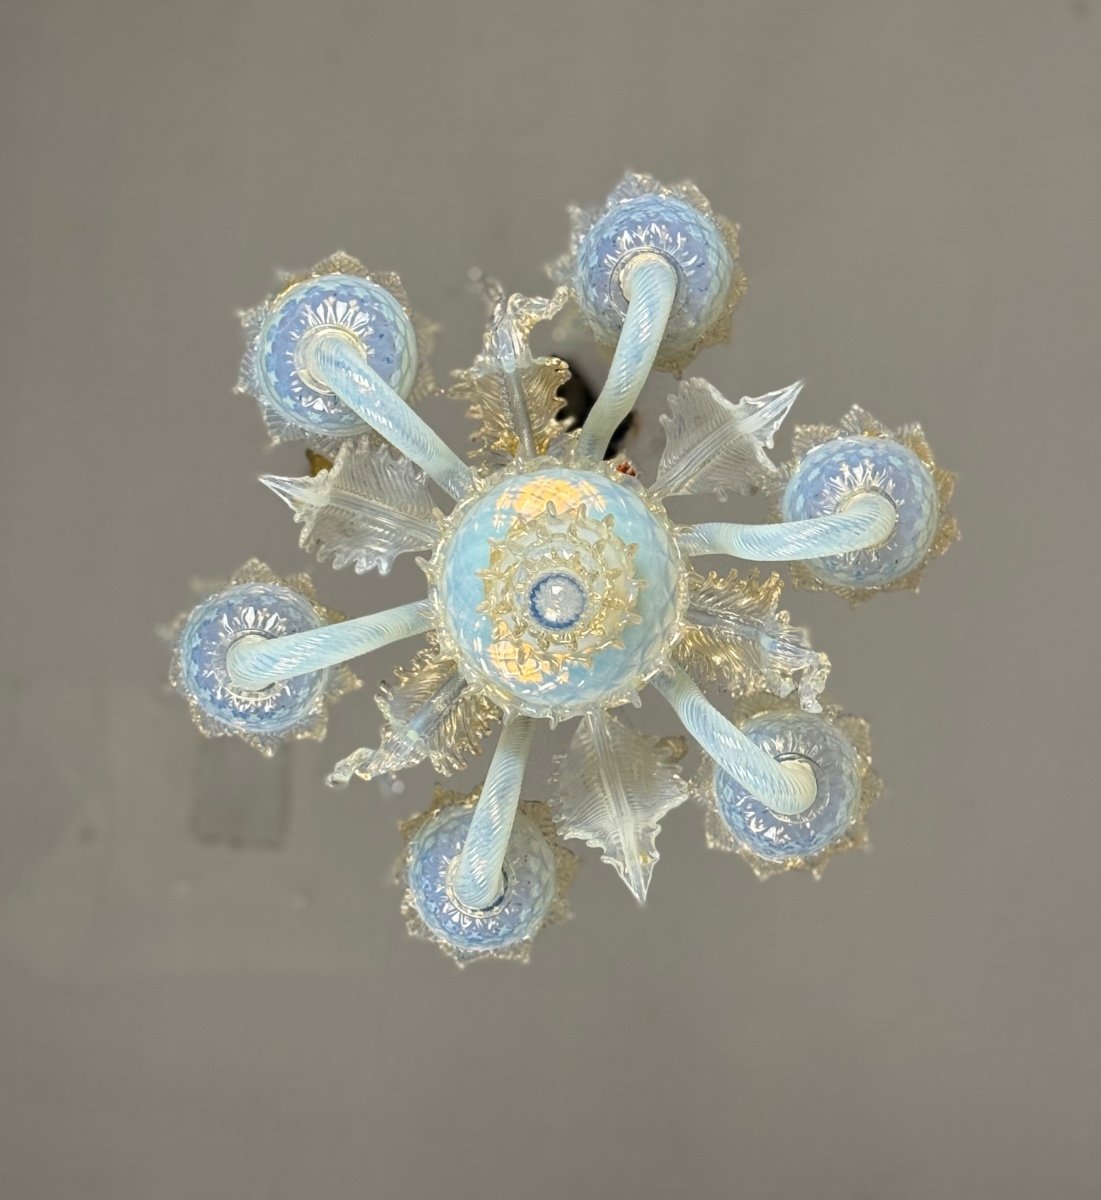 Small Venetian Chandelier In Opalescent Blue And Gold Murano Glass, 6 Arms Of Light Circa 1950-photo-3